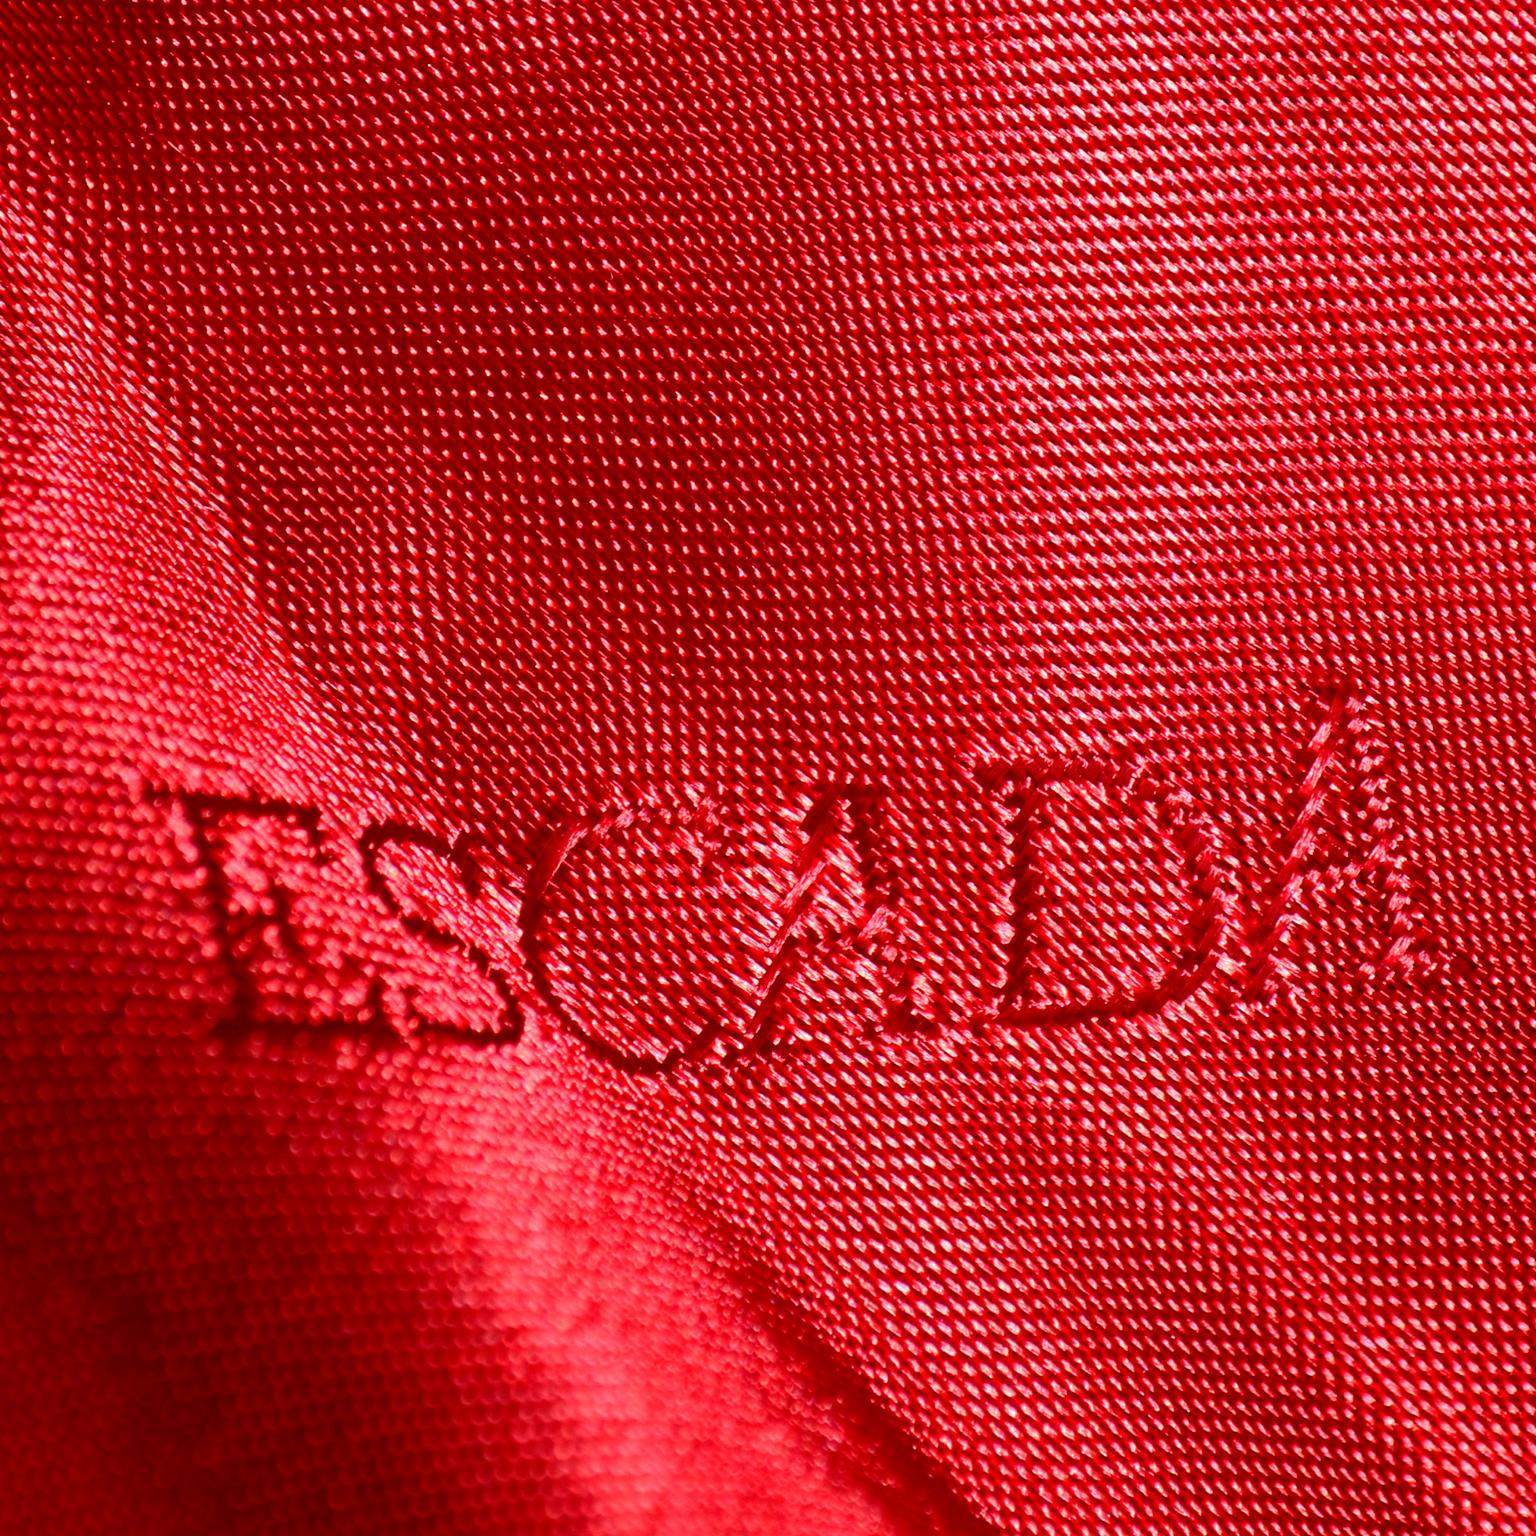 Vintage Escada Margaretha Ley Red Mohair Alpaca Wool Coat With Pockets In Excellent Condition For Sale In Portland, OR